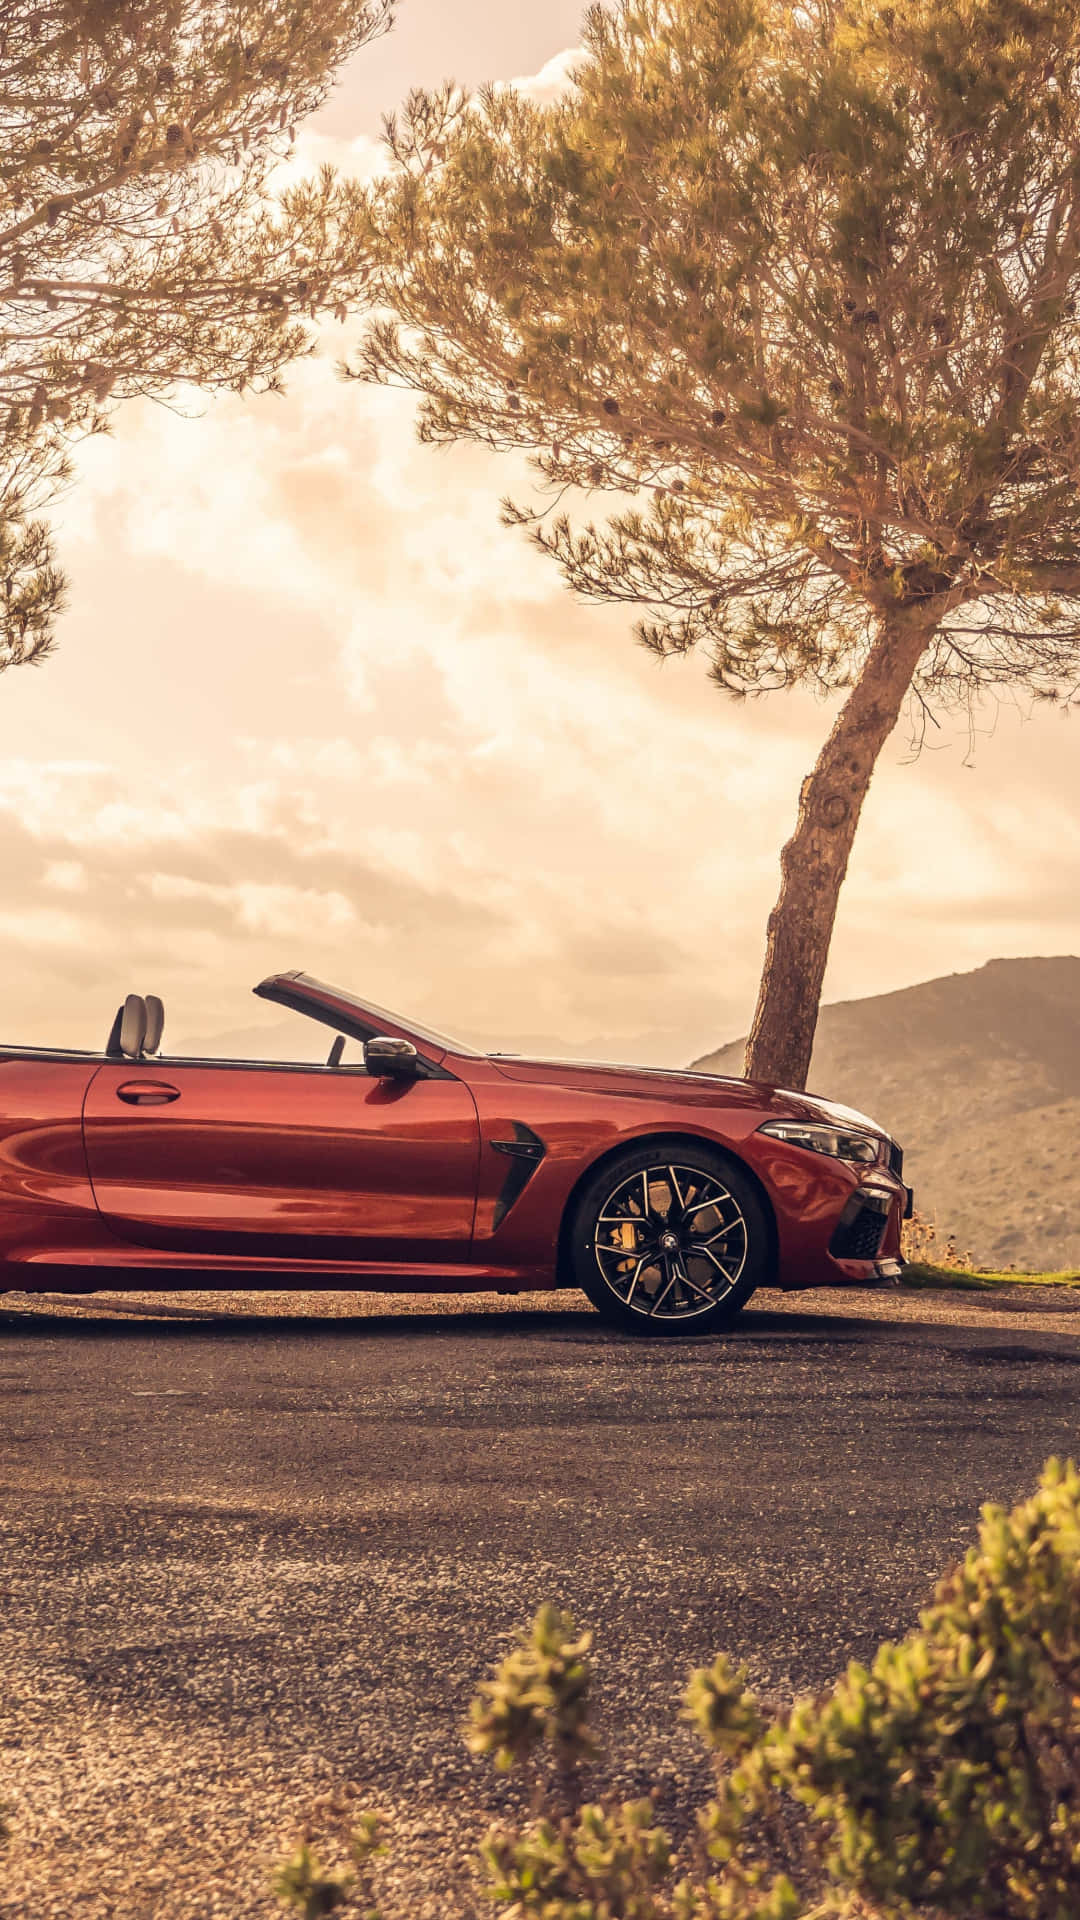 Luxury and Style Conquer the Road: The BMW M8 Wallpaper